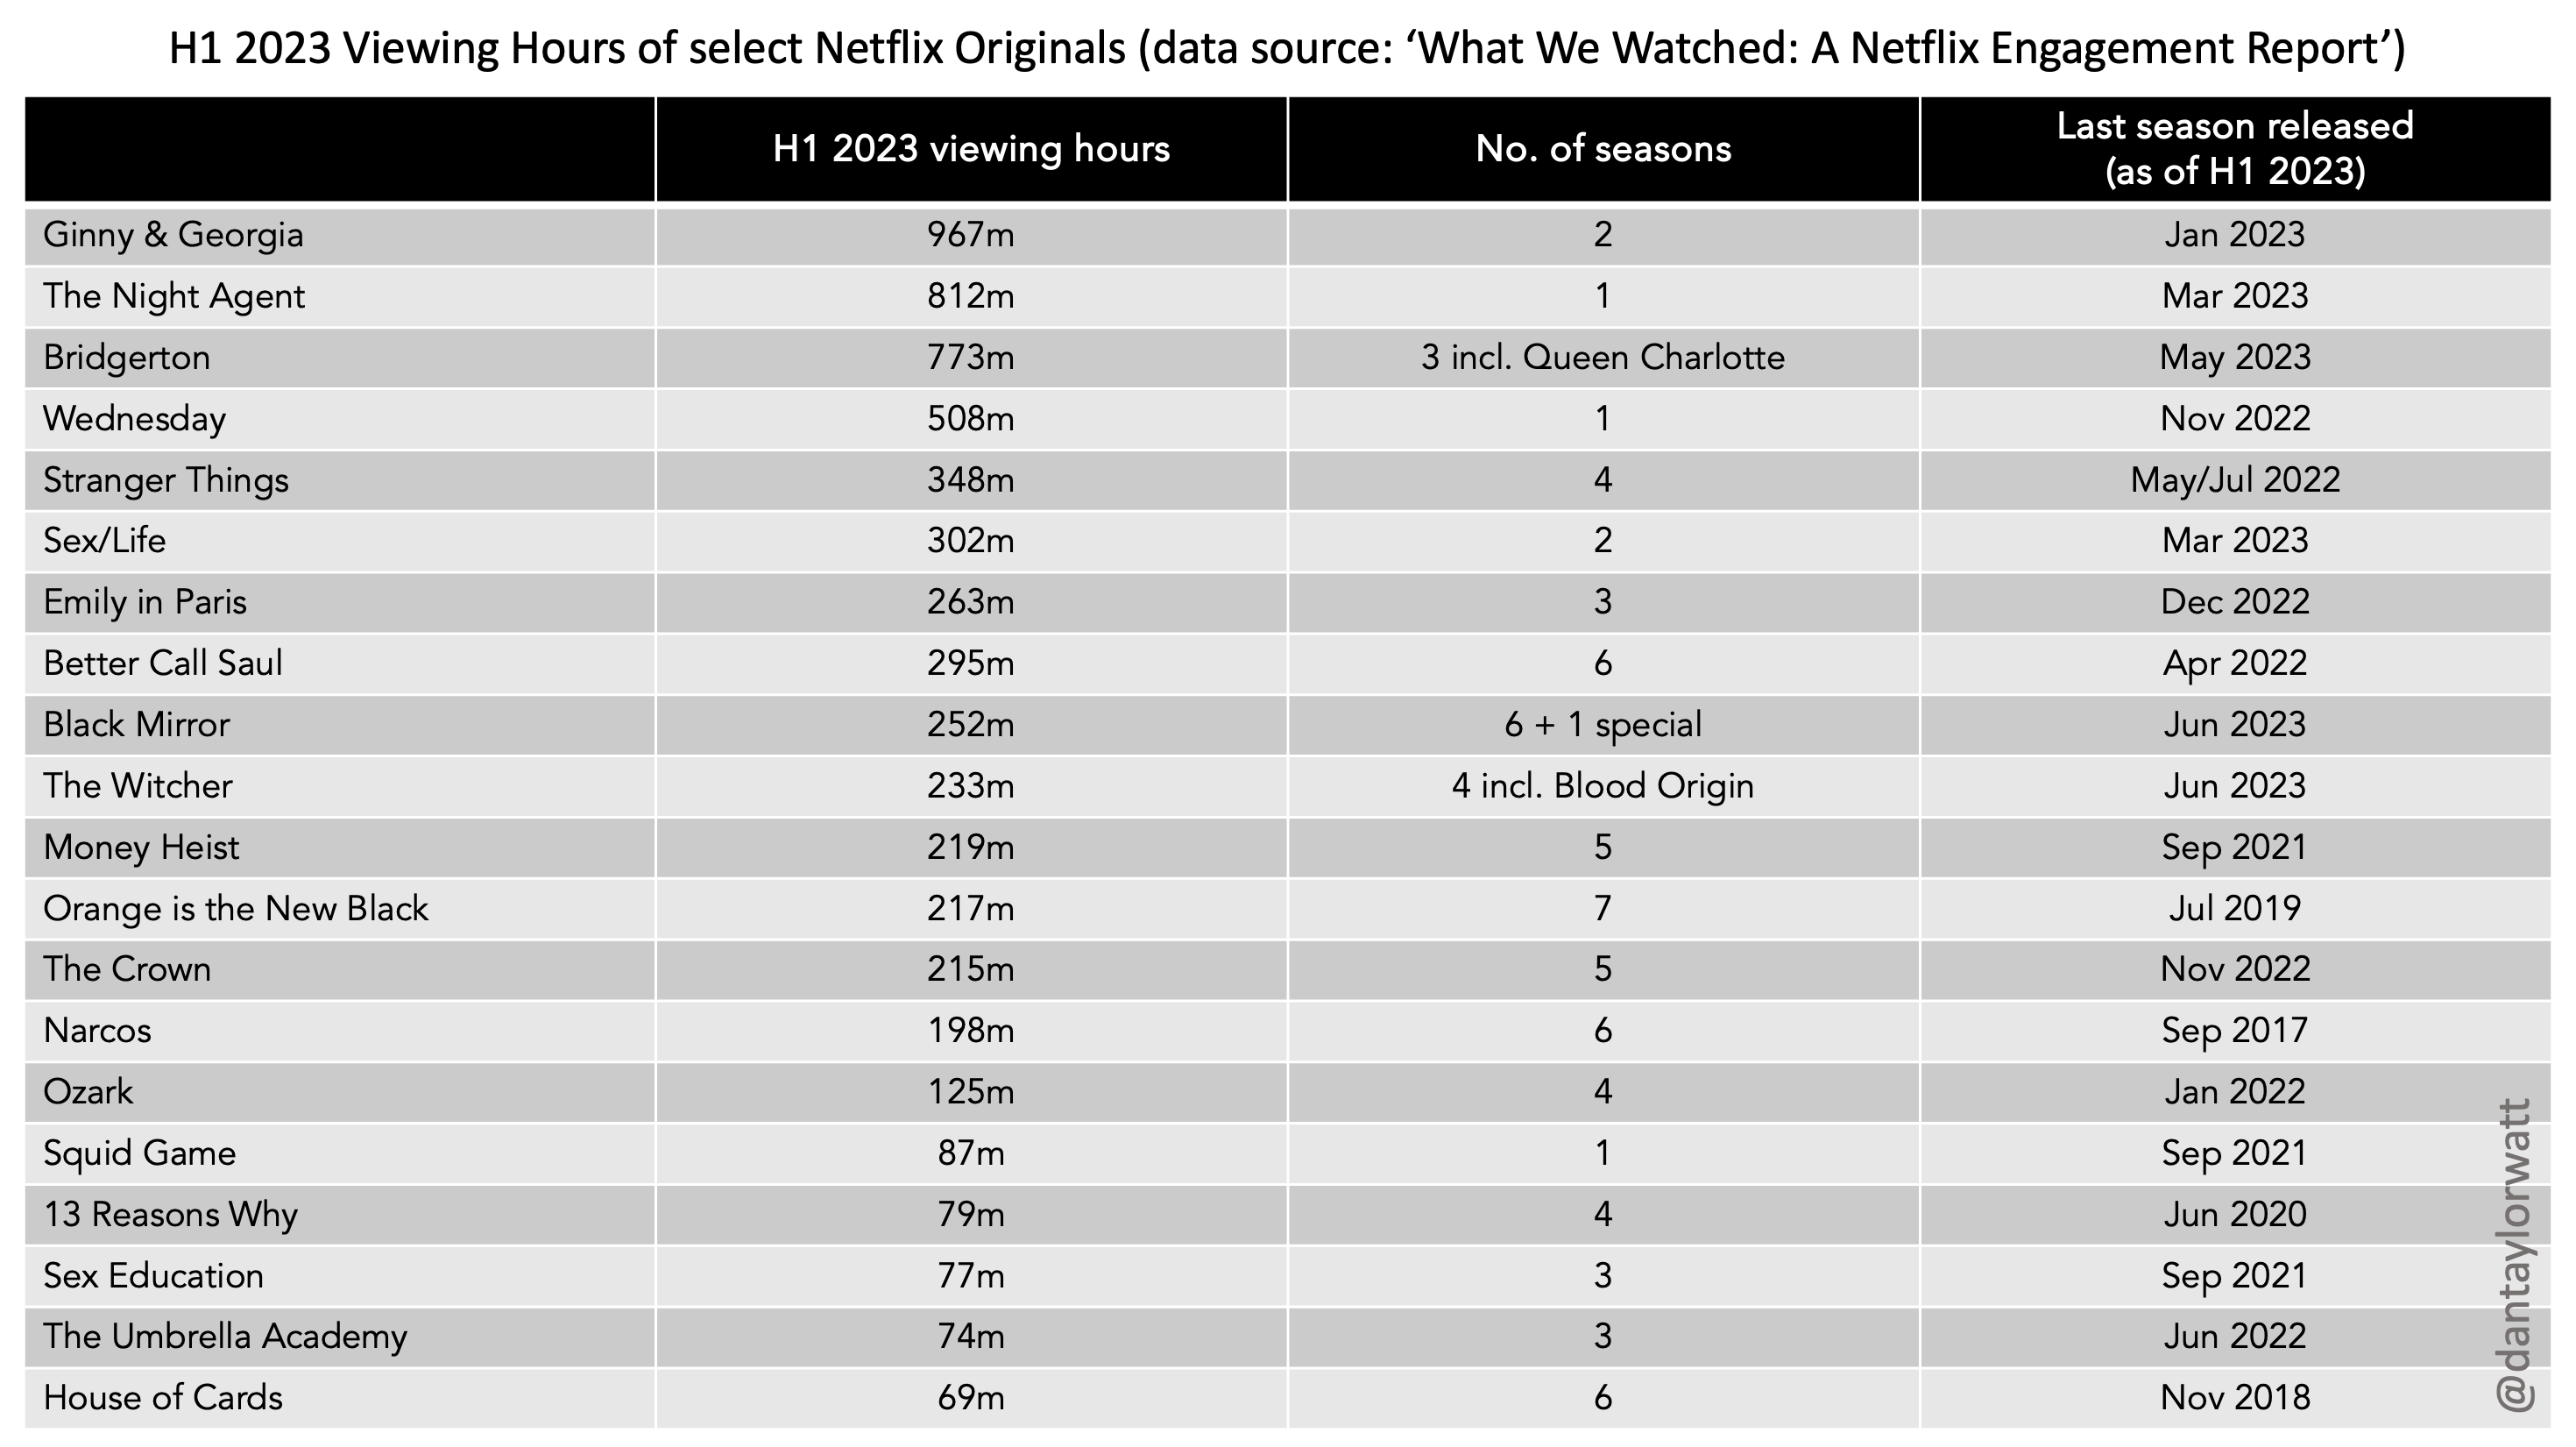 Table showing H1 2023 Viewing Hours of select Netflix Originals